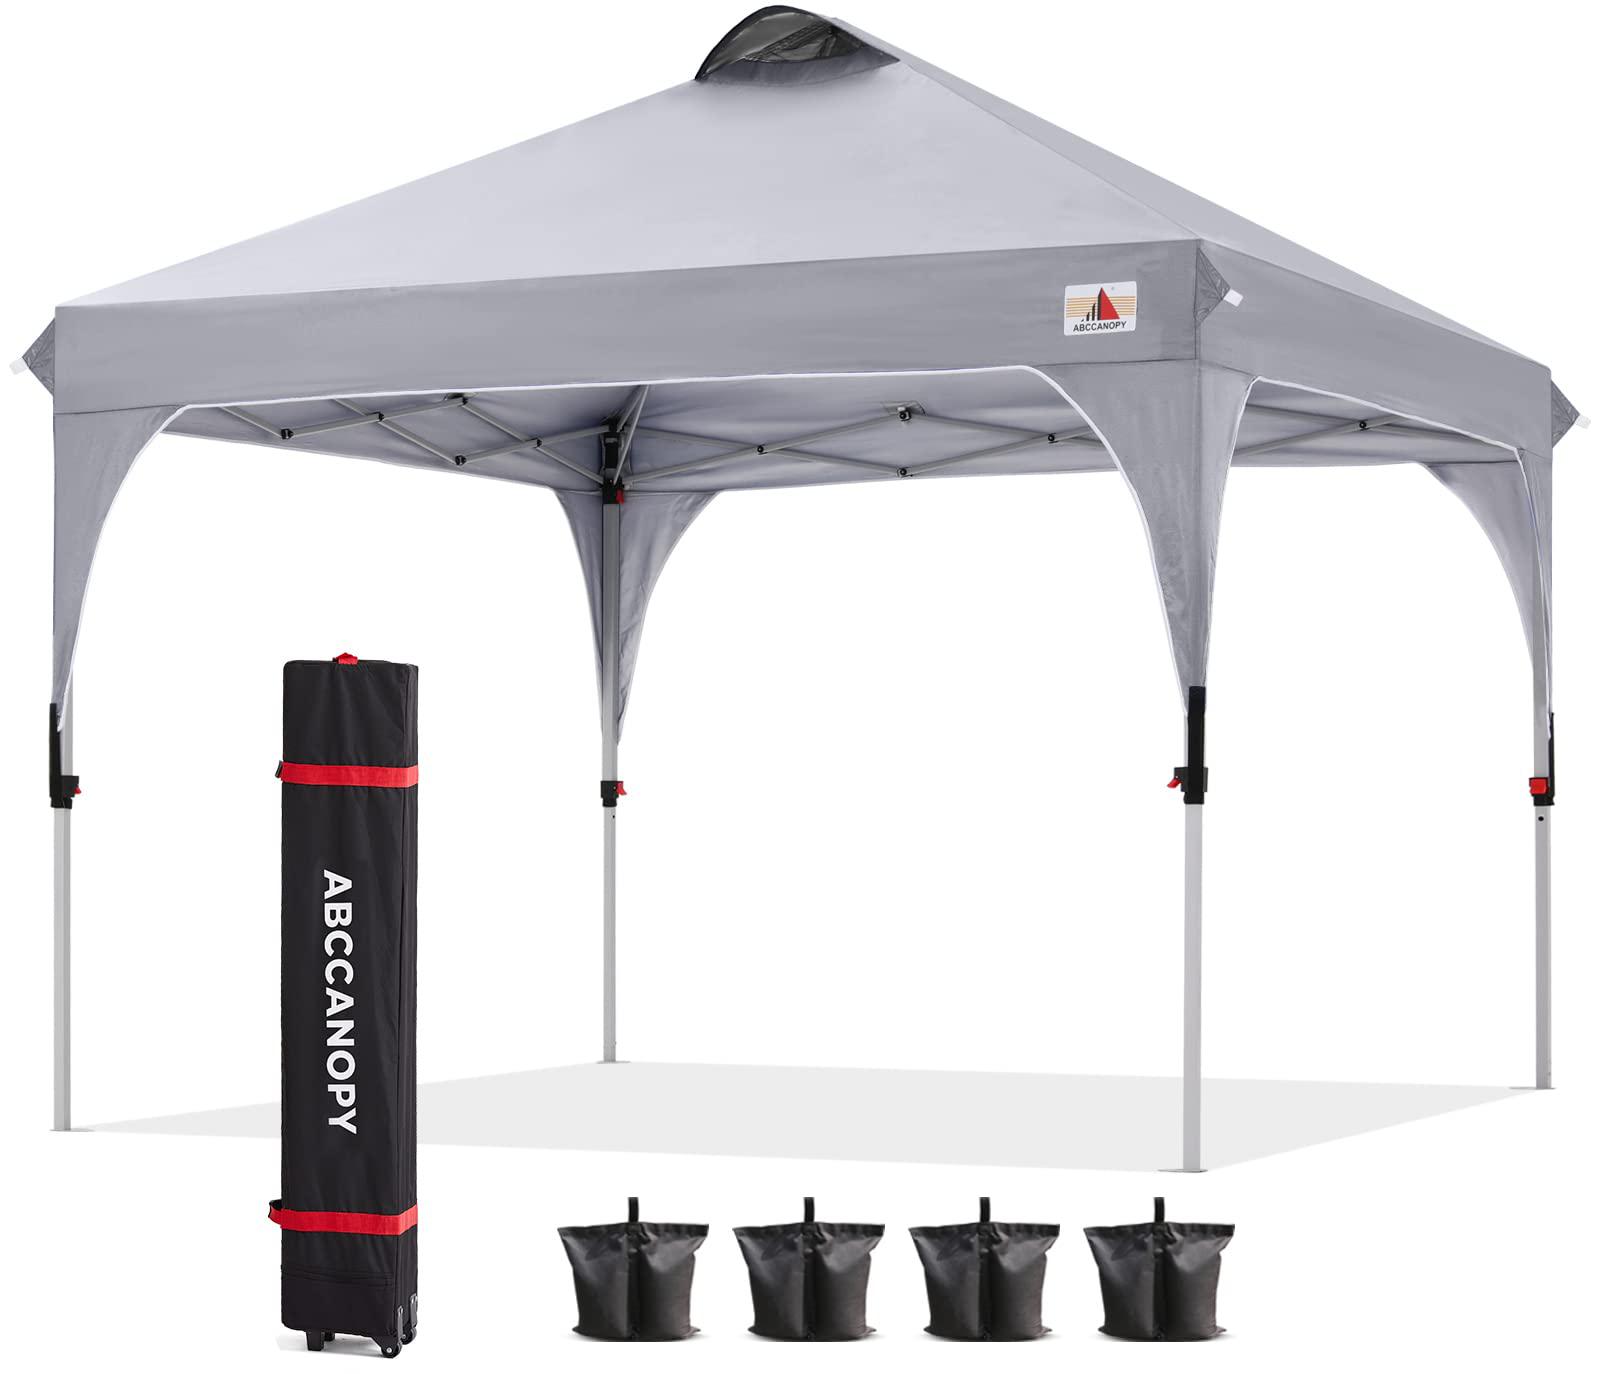 abccanopy outdoor pop up canopy tent 8x8 camping sun shelter-series, gray